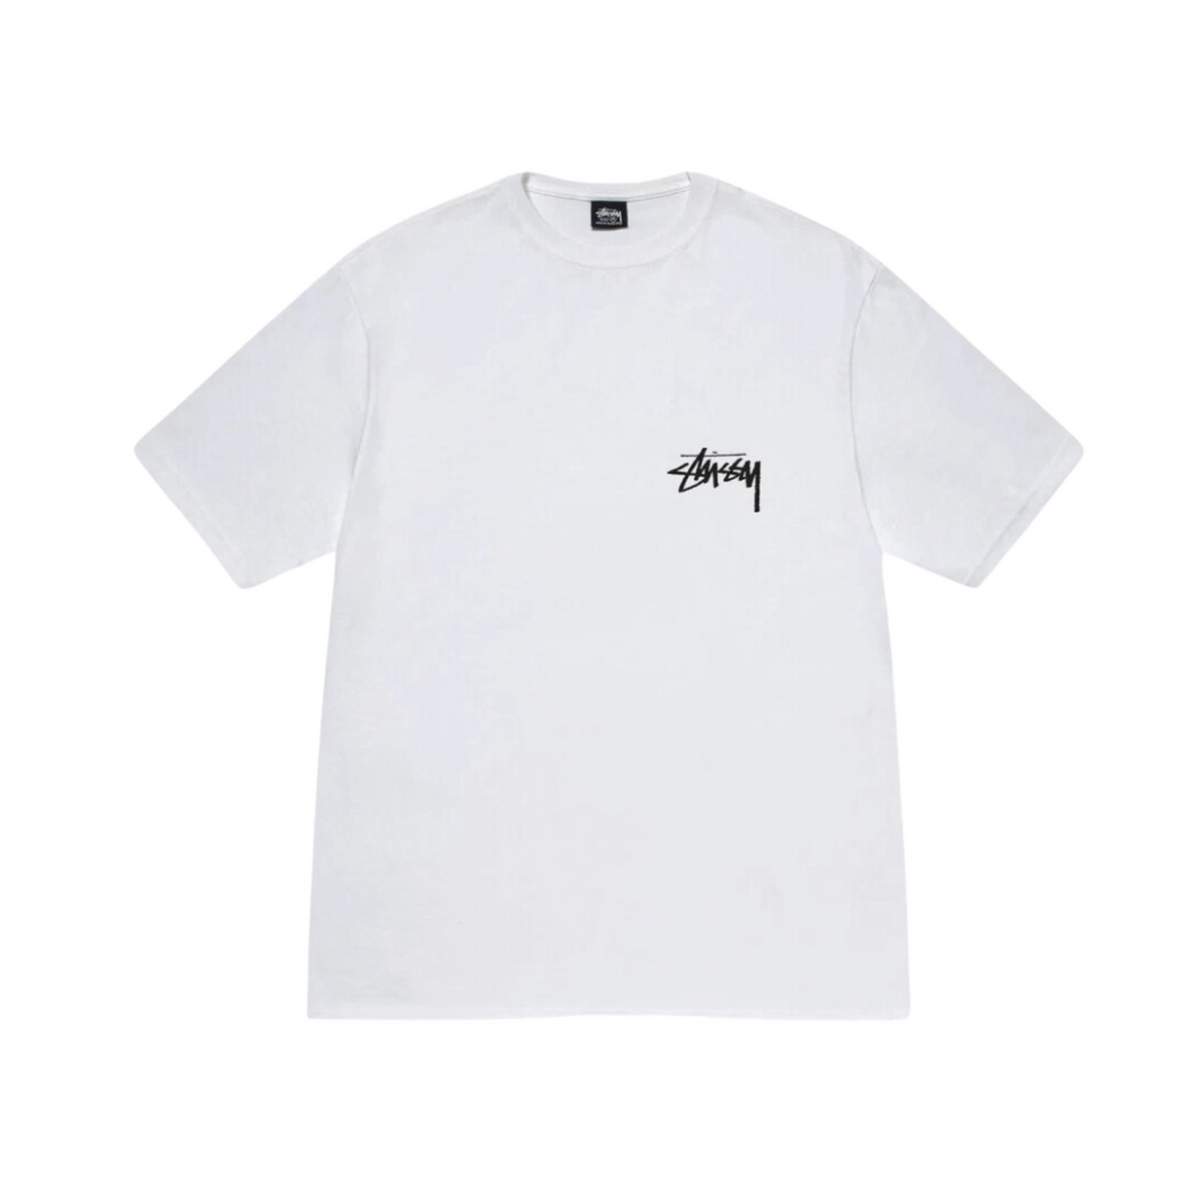 Stüssy Diced Out T-shirt "White"